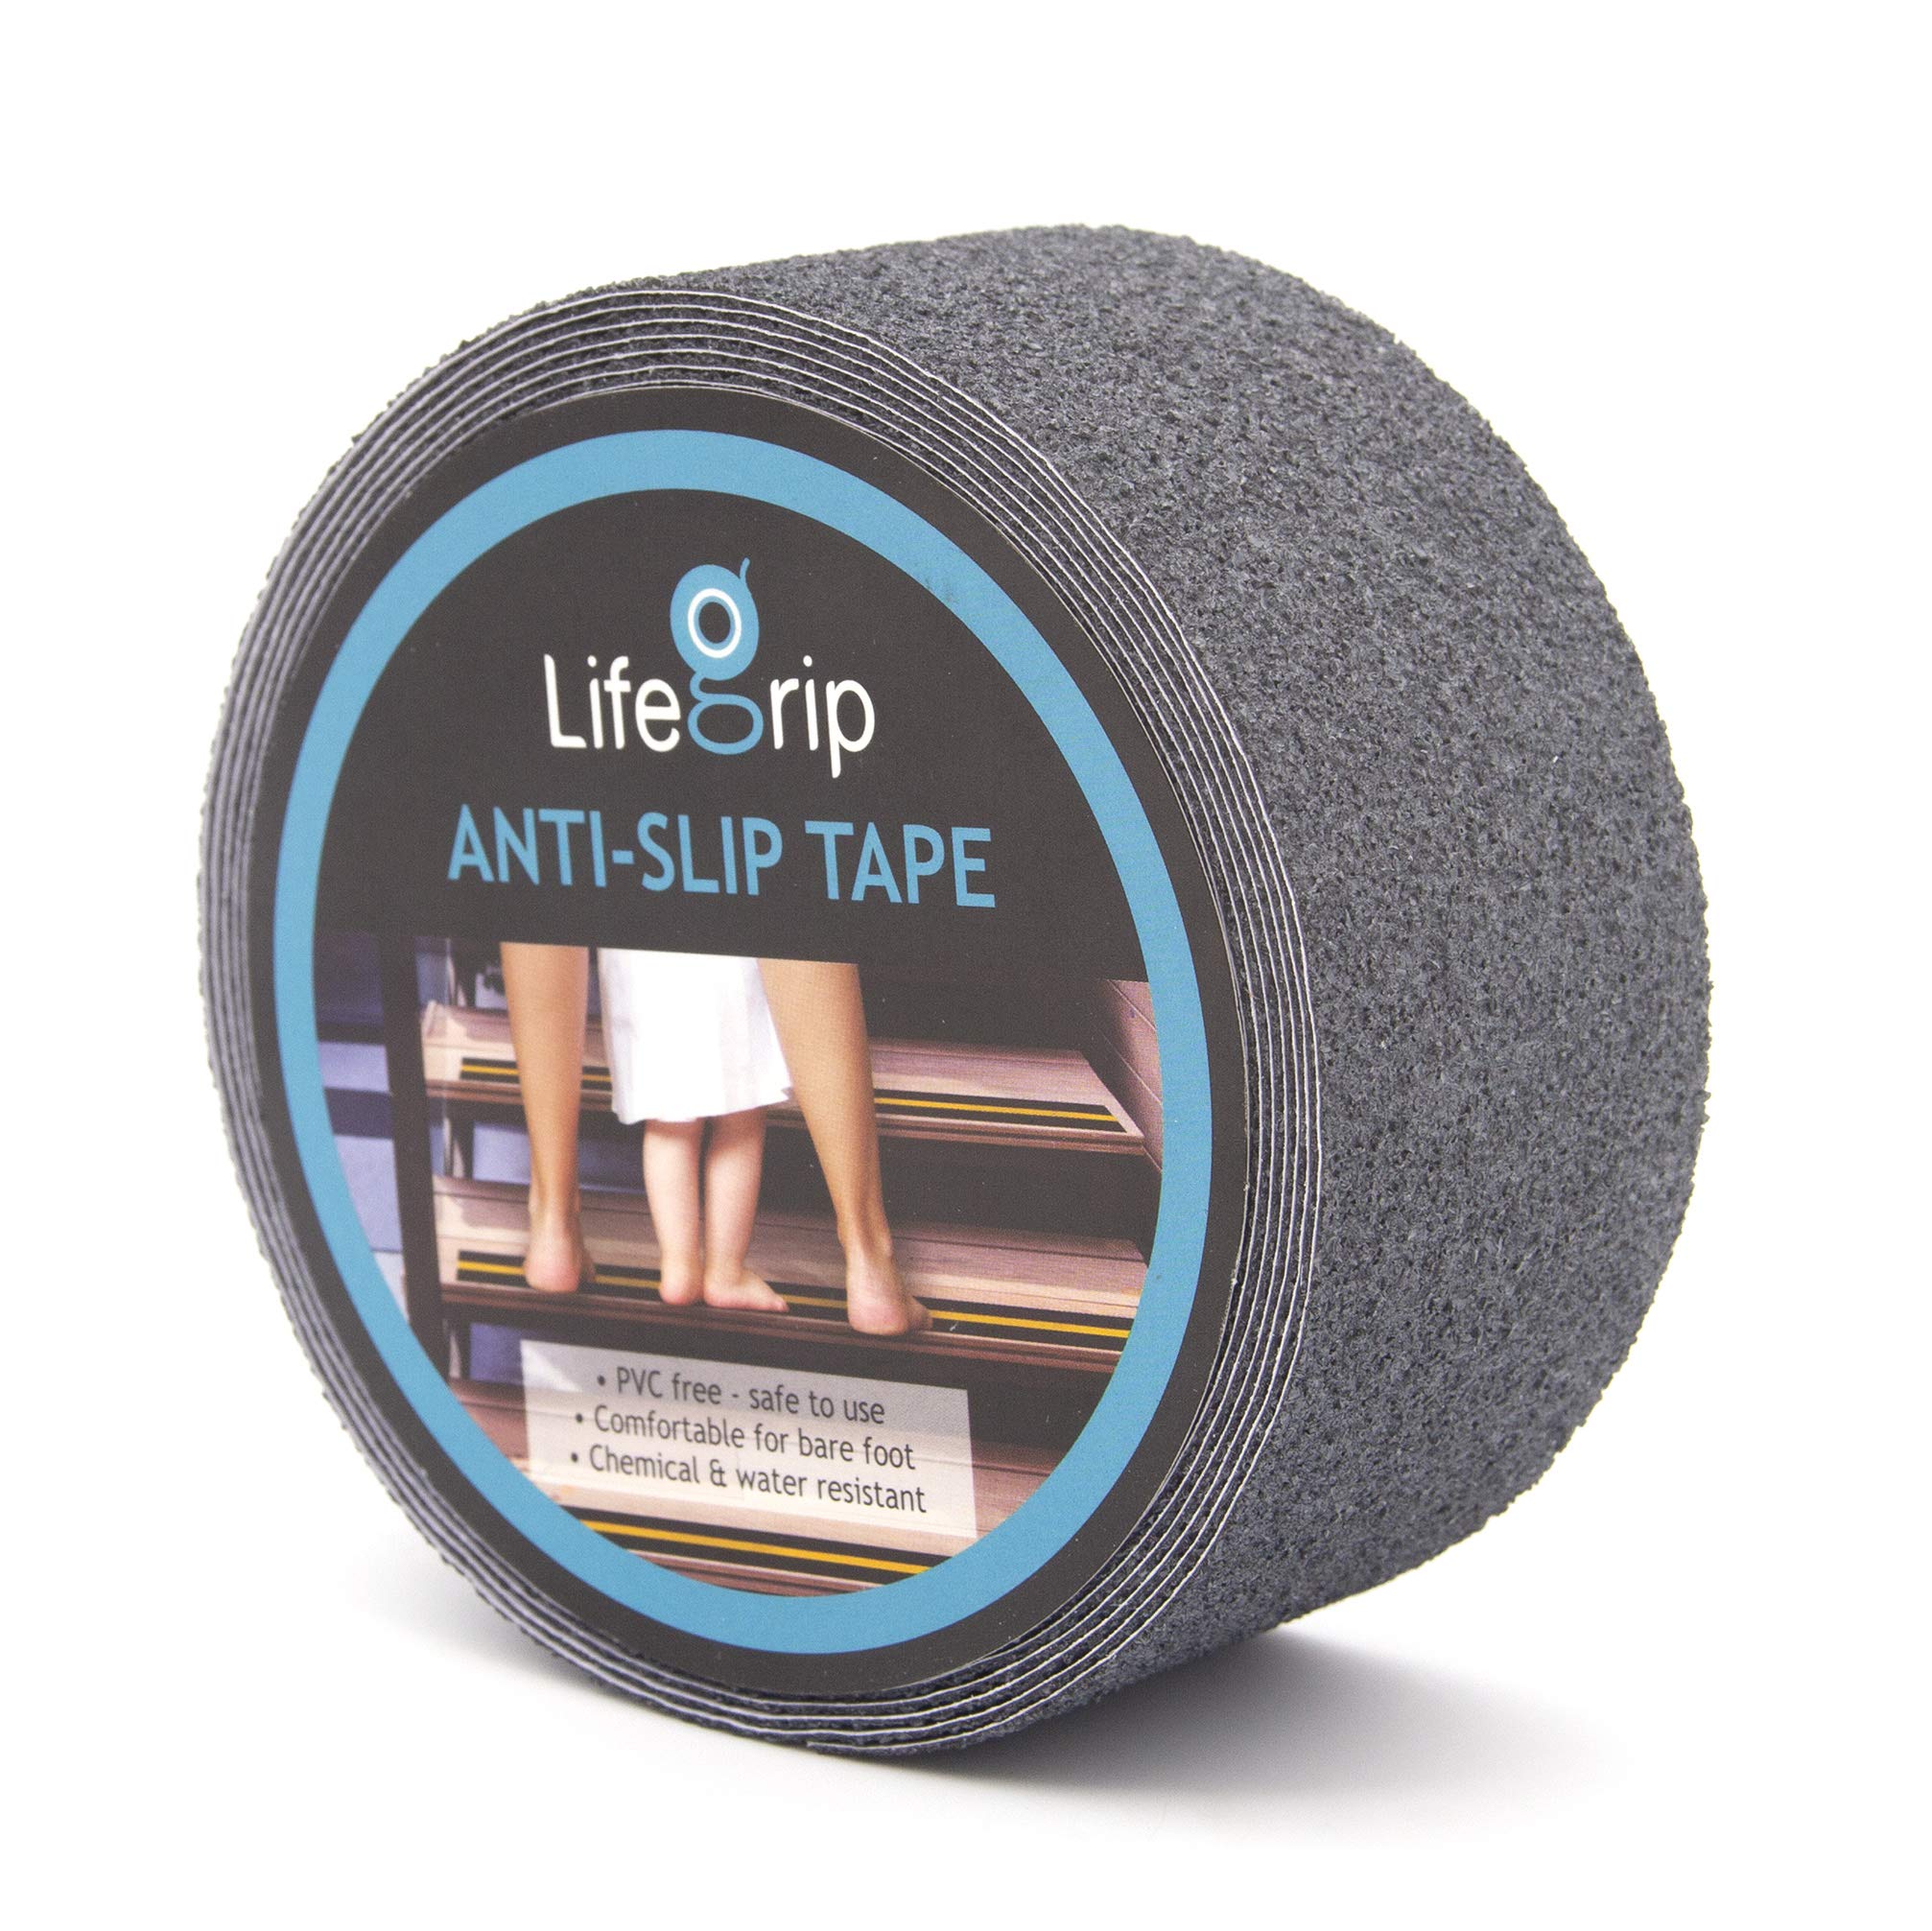 LifeGrip Stay on Track LifeGrip Anti Slip Safety Tape, Non Slip Stair Tread, Textured Rubber Surface, Comfortable for Bare Foot, 2 inch X 15 Foot, Grey